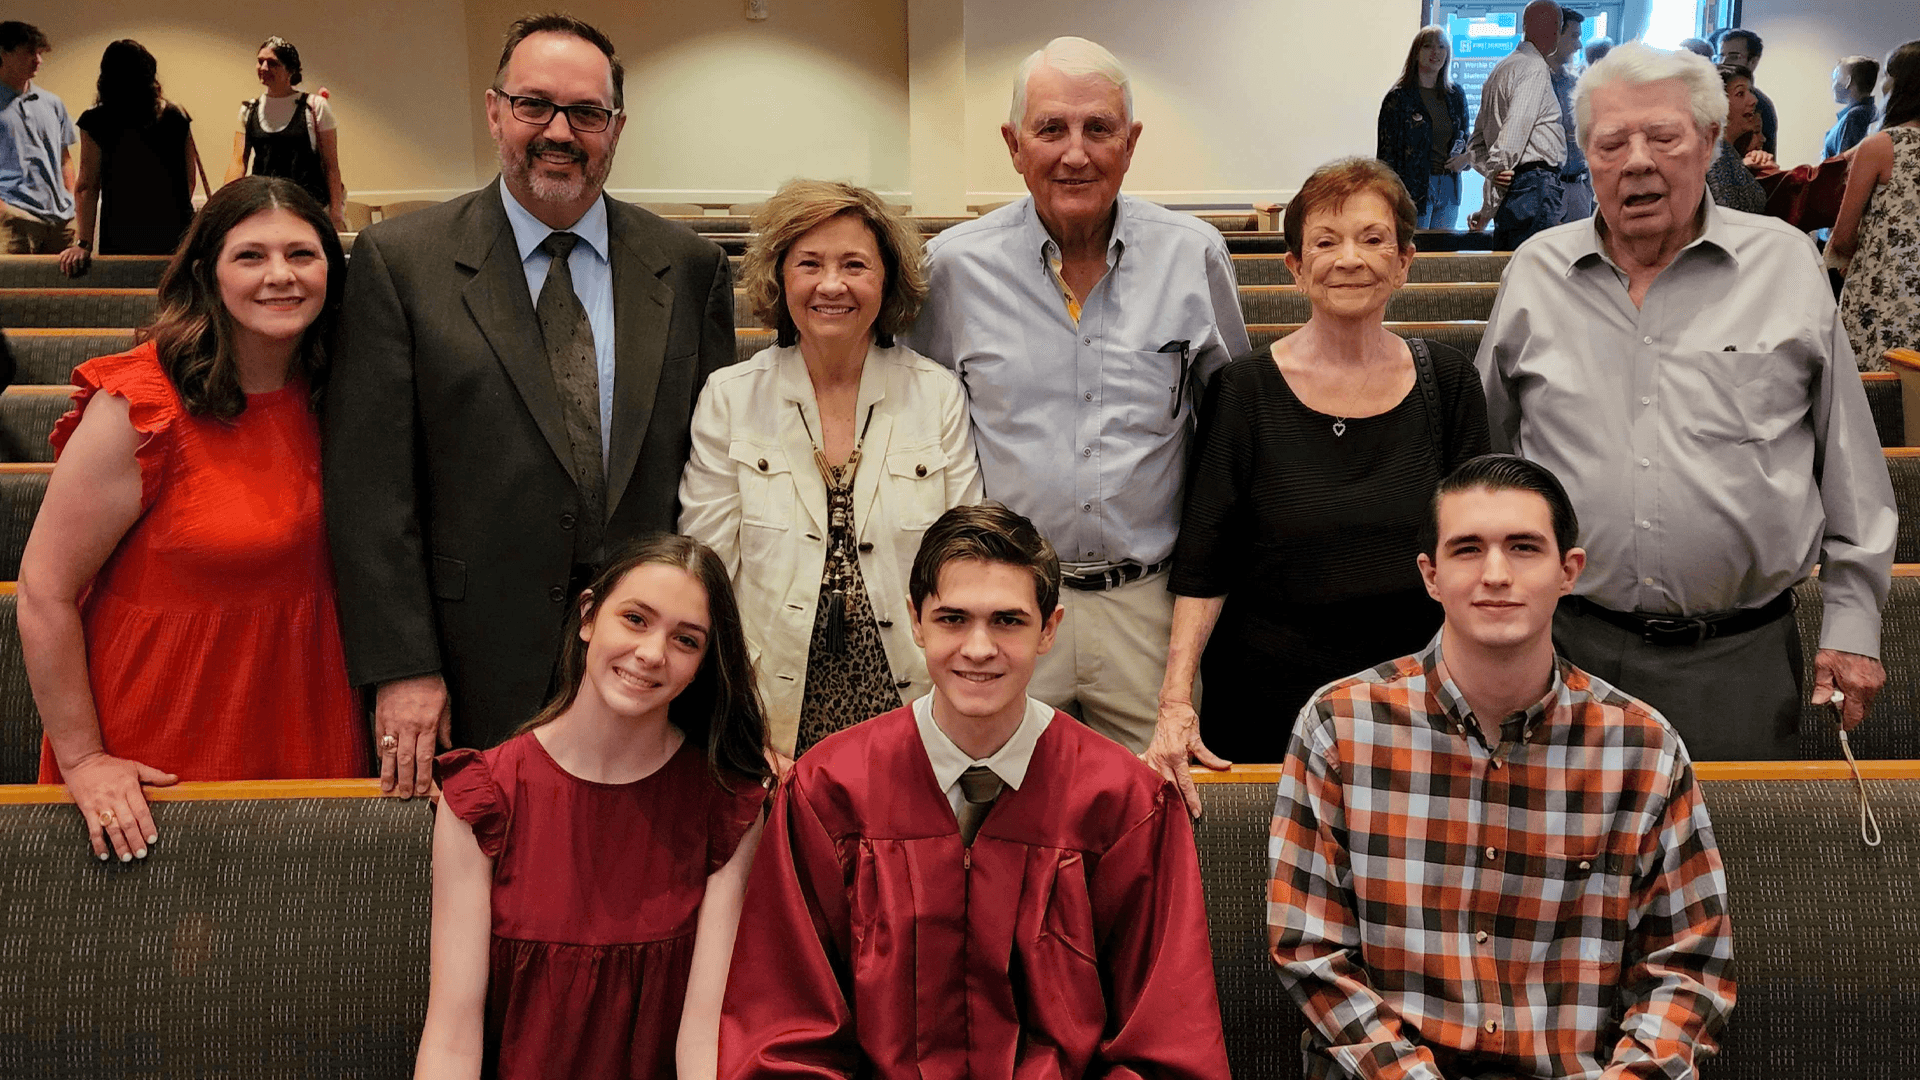 My family at my brother's graduation